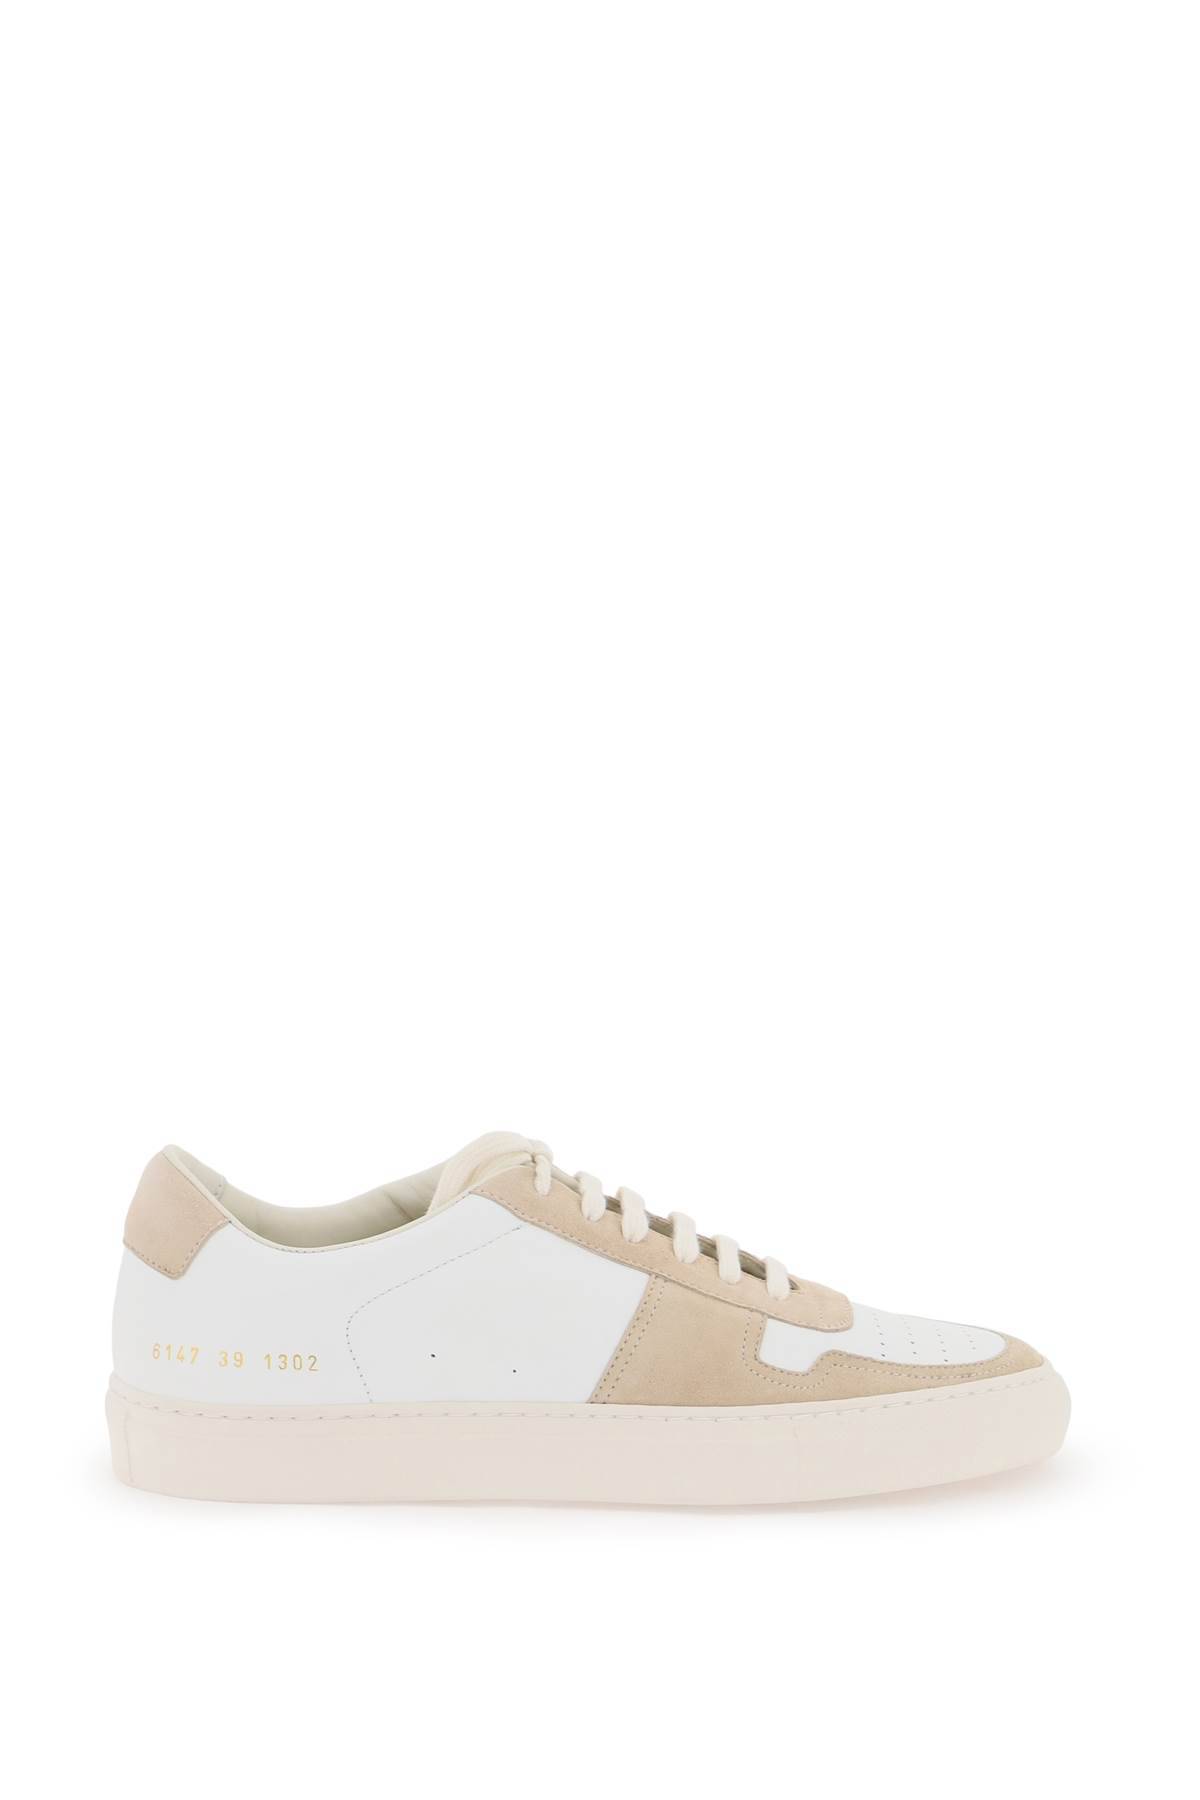 COMMON PROJECTS COMMON PROJECTS basketball sneaker